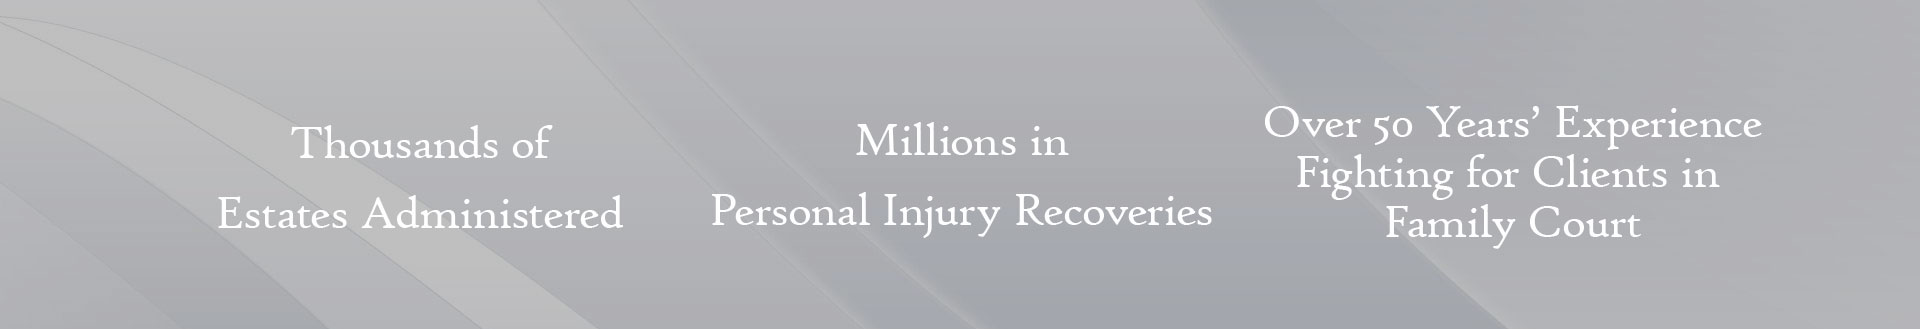 eckell-sparks-law-millions-in-personal-injury-recoveries